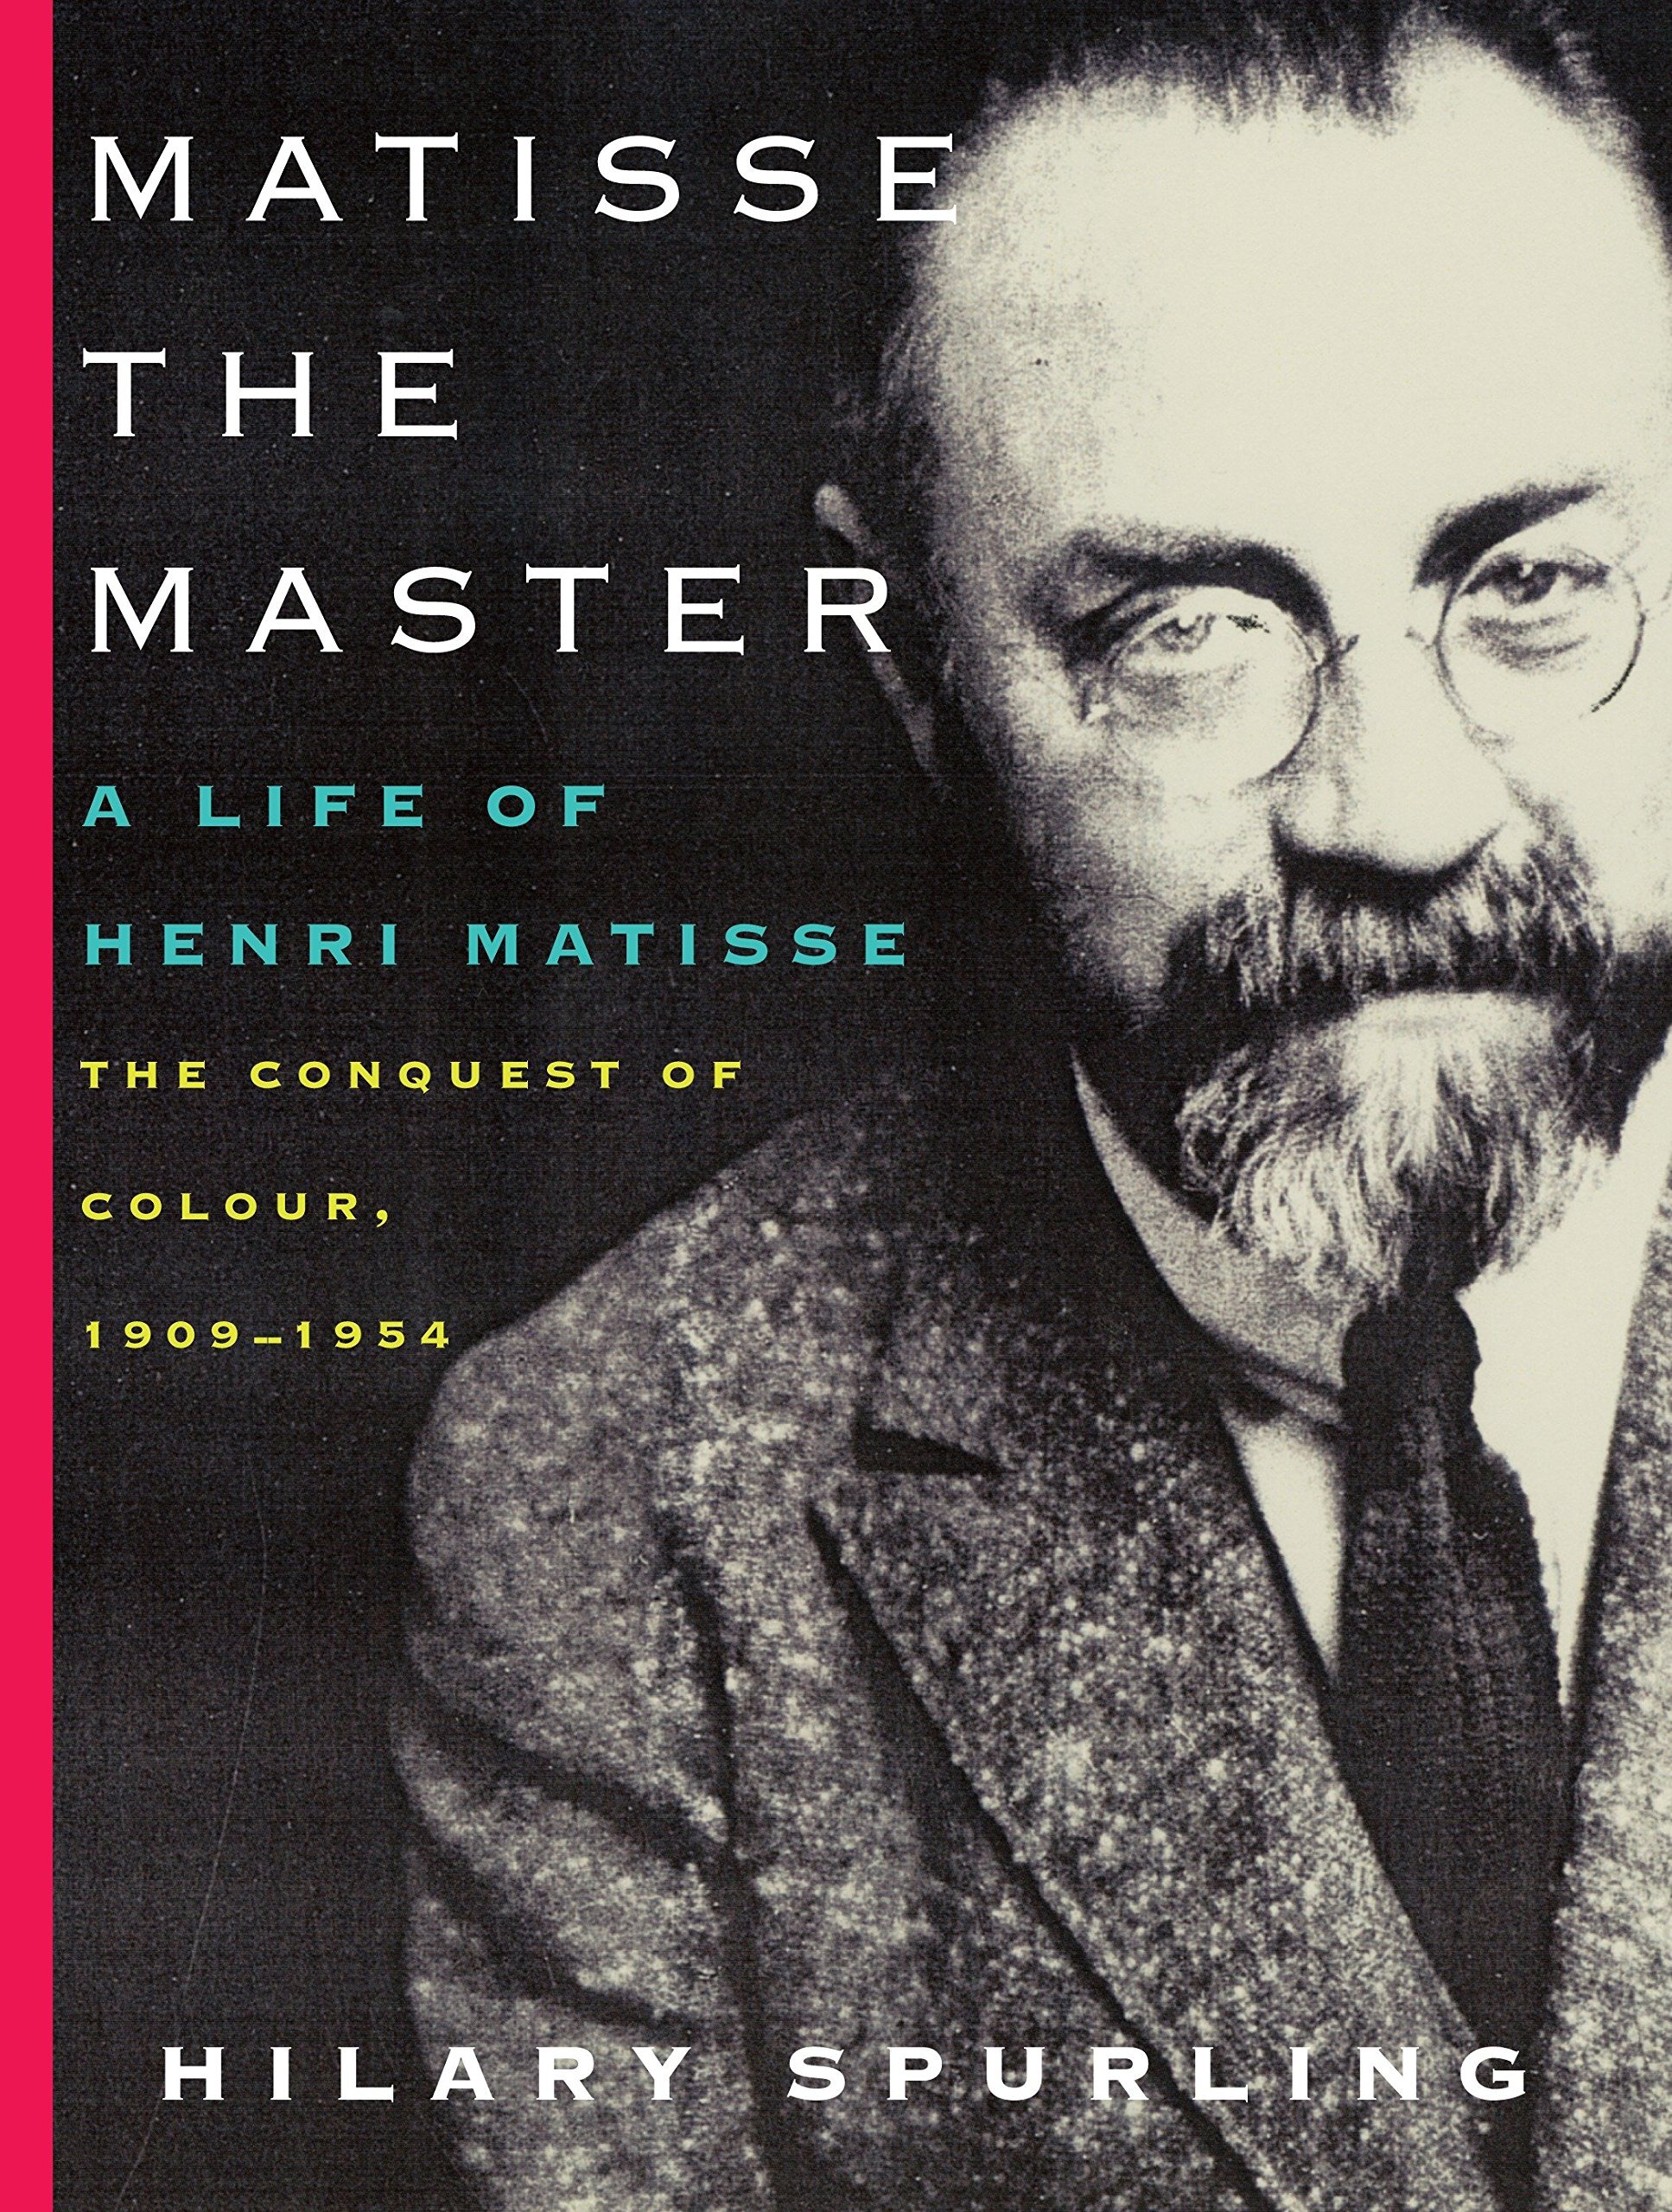 Matisse the Master, Hilary Spurling, 2005